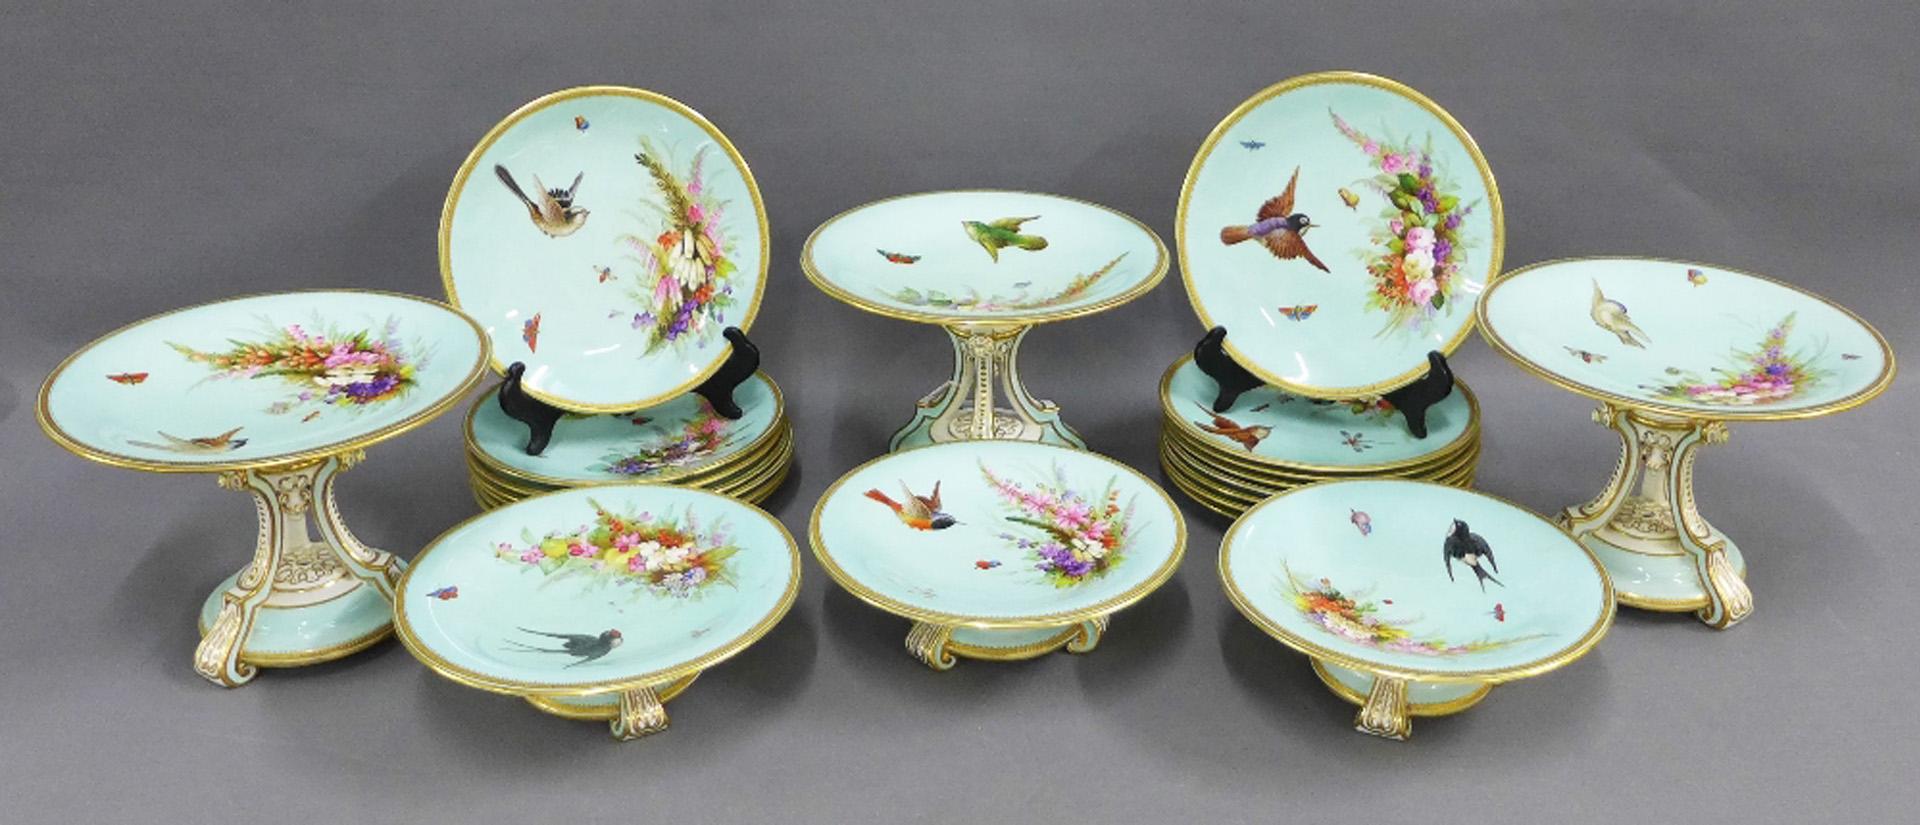 An impressive and stunning Royal Worcester dessert service. All handpainted  in the manner of John Hopewell & George Hundley and raised enamelled with a feast of garden flowers, flying birds, butterflies and ladybirds. The paintings are set on a